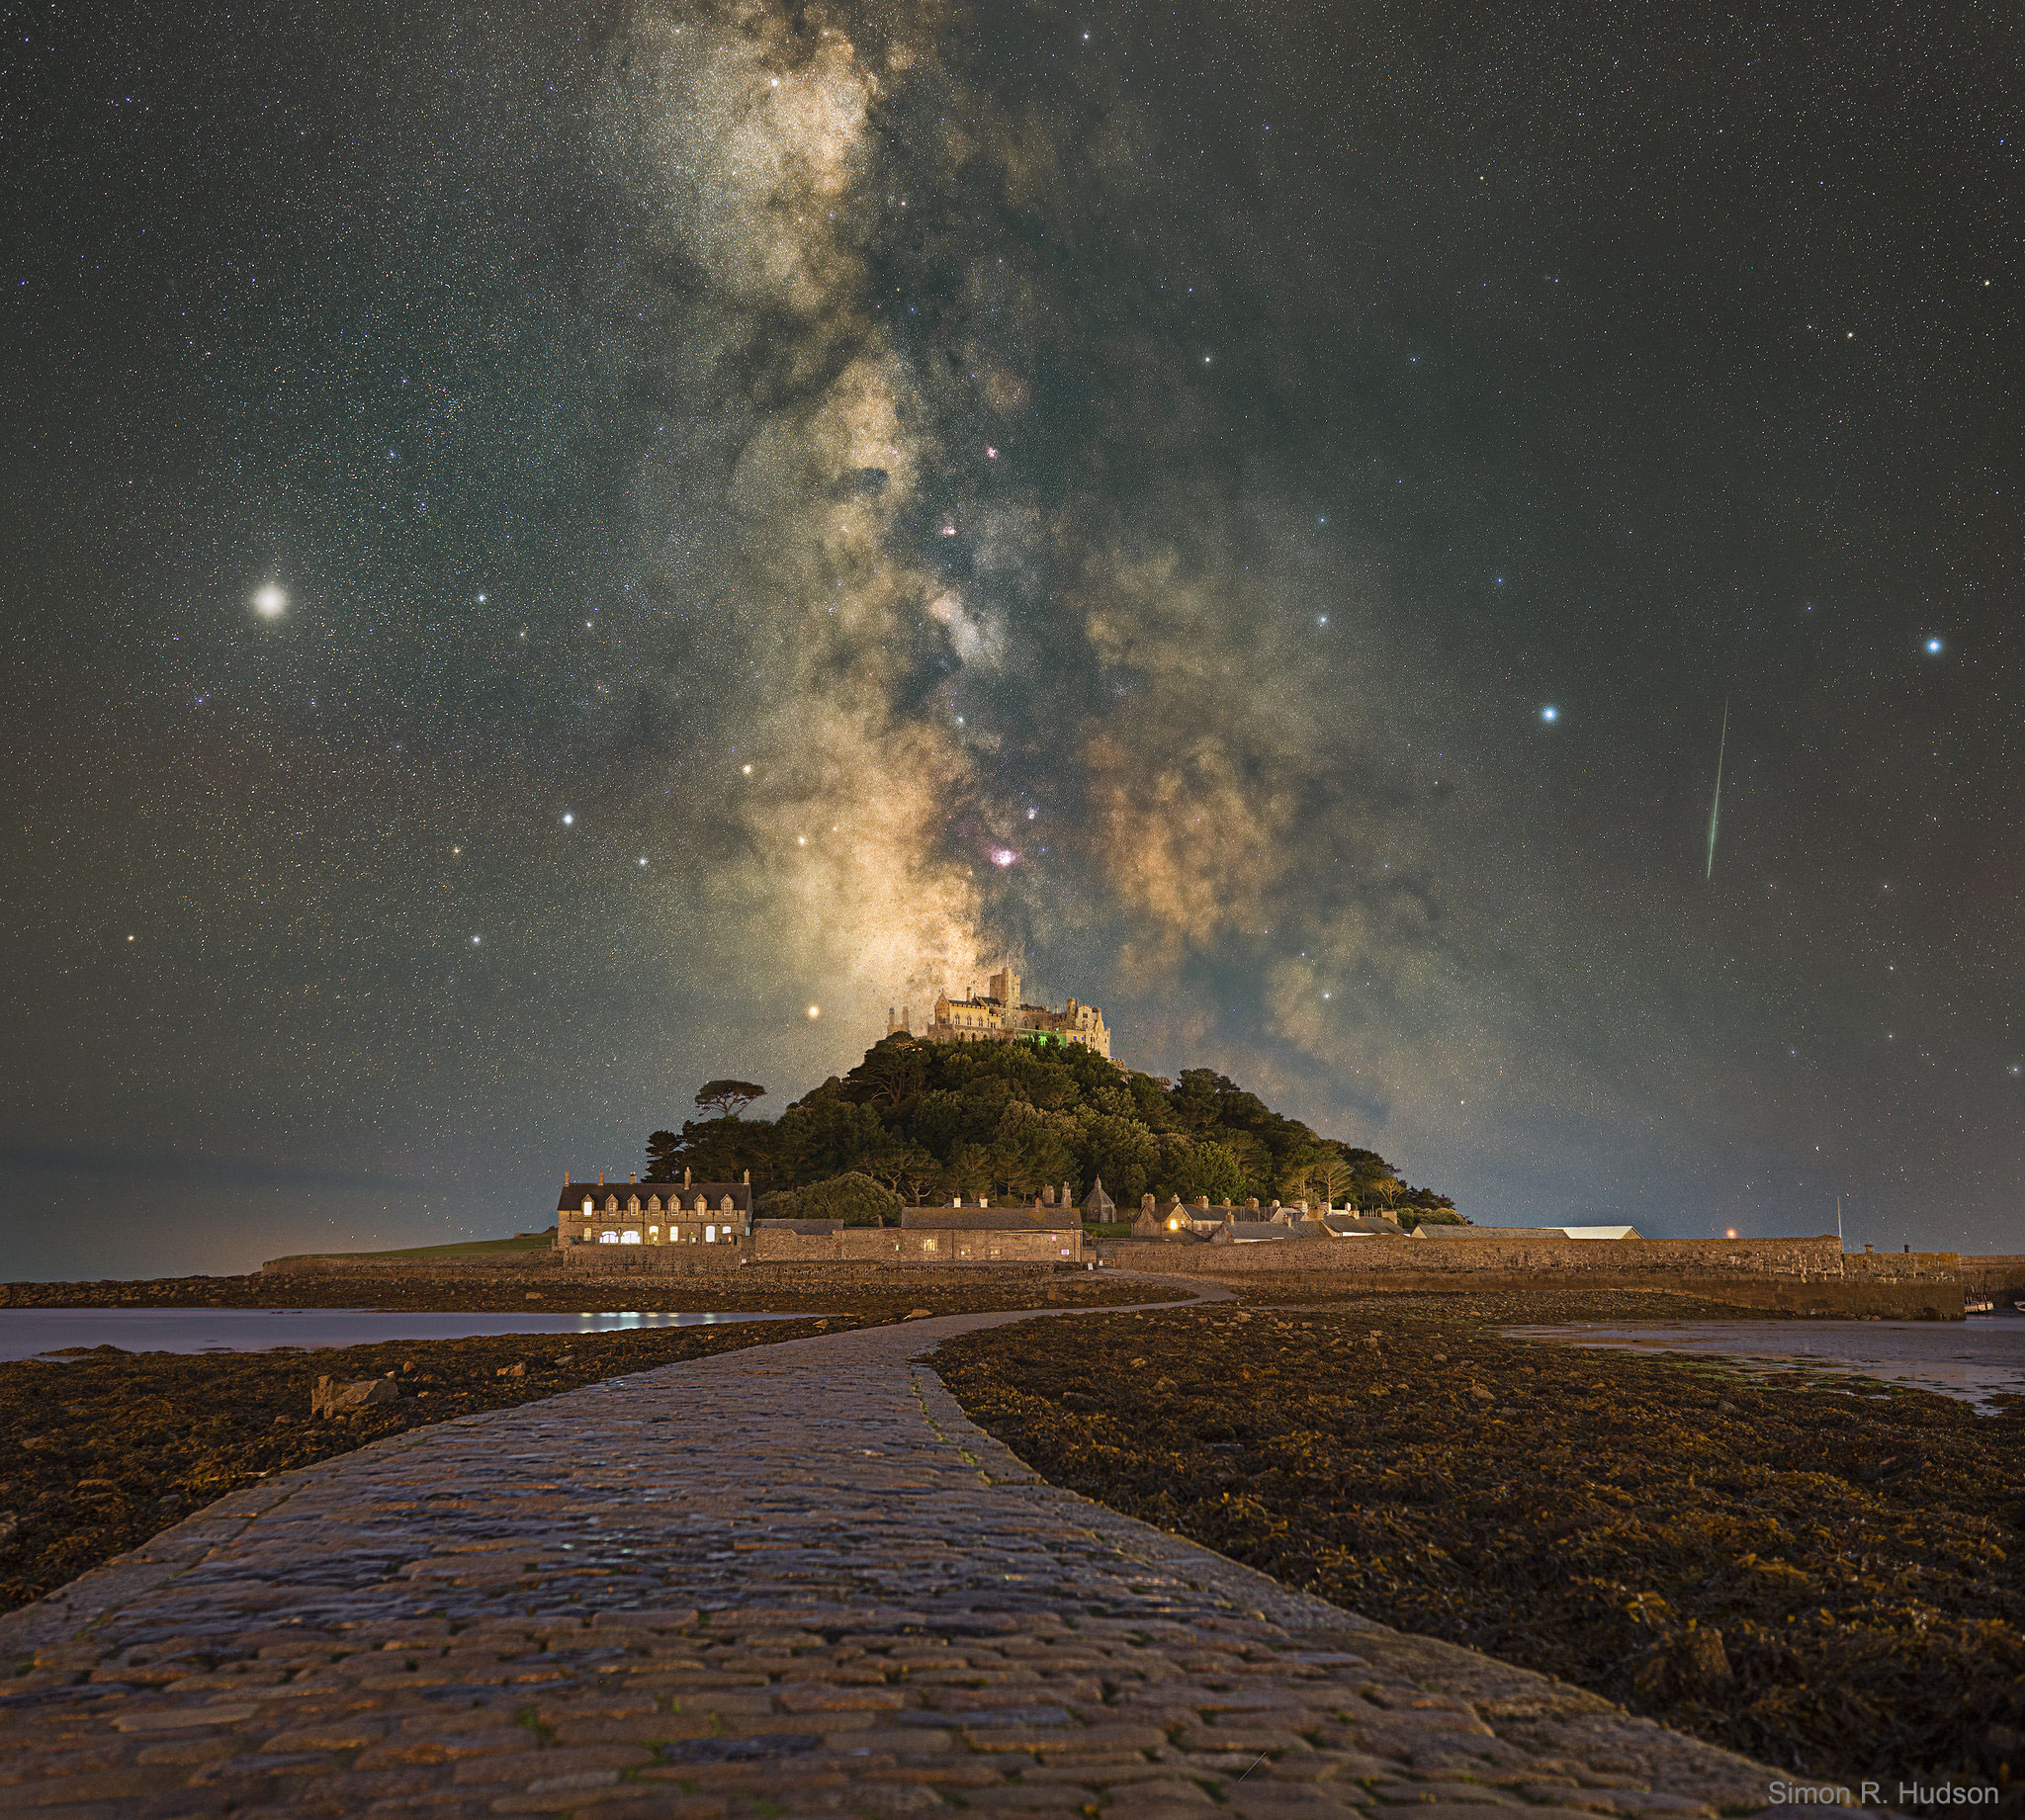 The Milky Way over St Michaels Mount